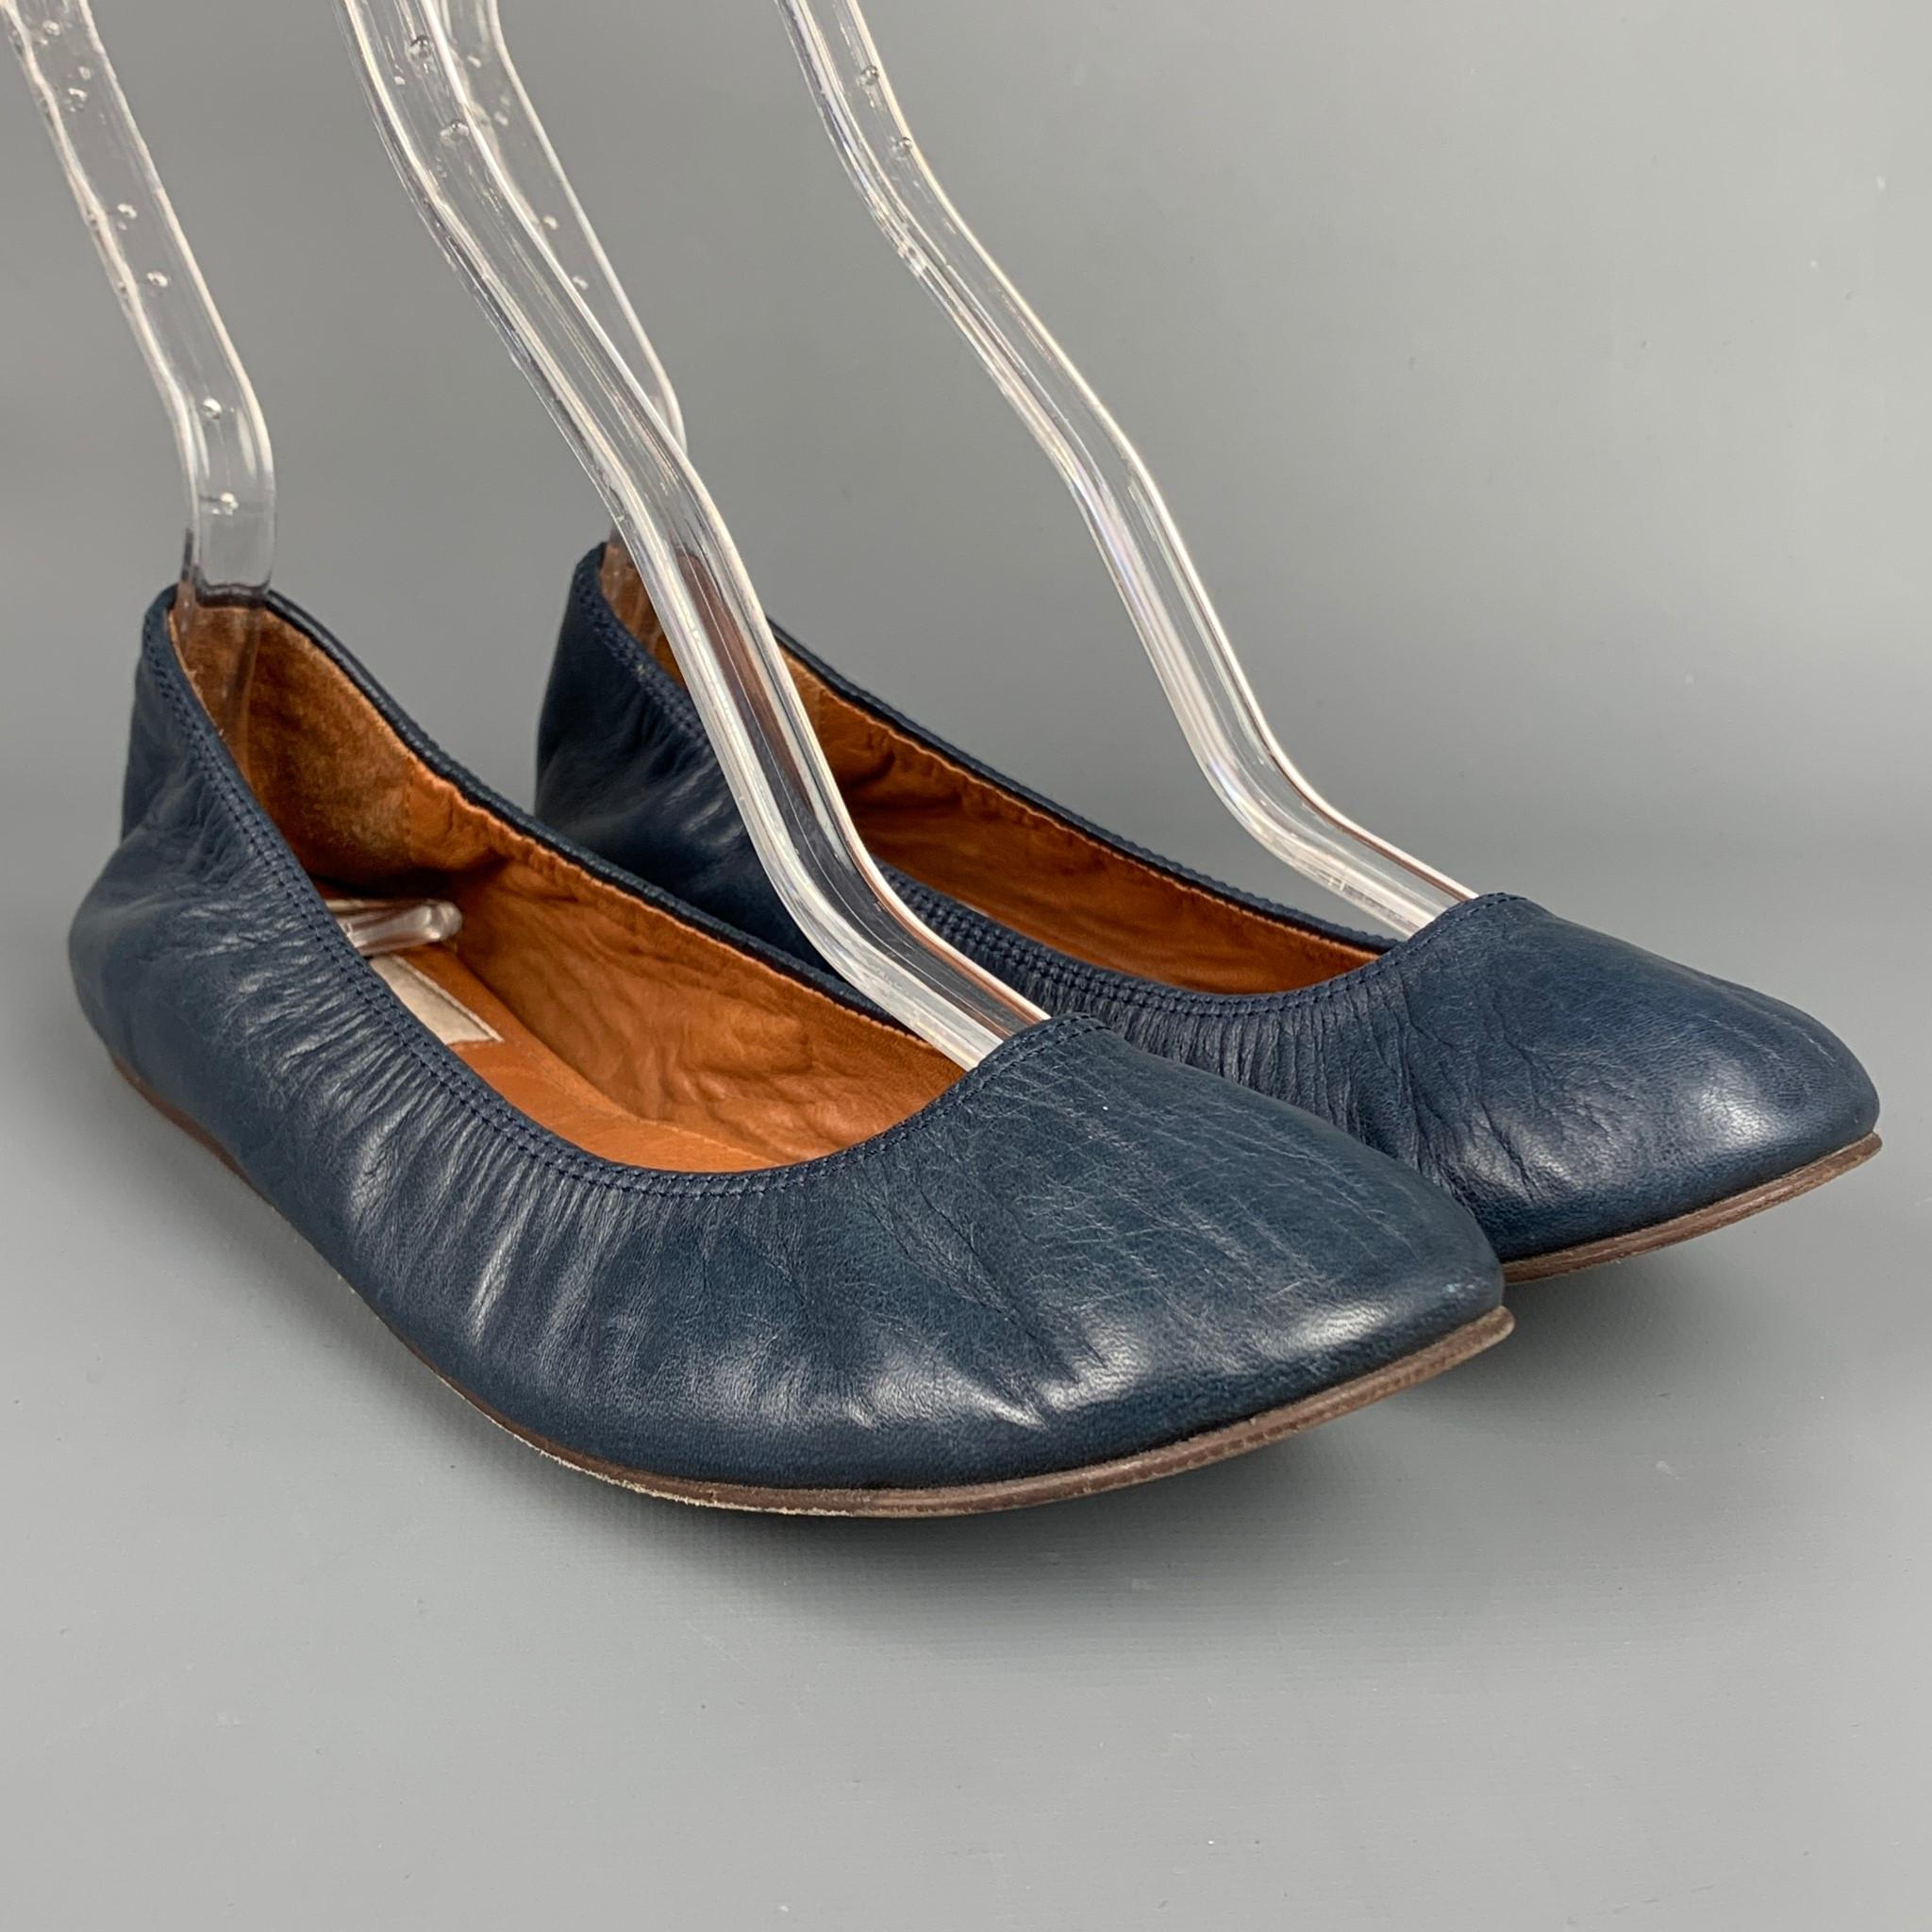 LANVIN flats comes in a blue leather featuring a ballet style and a wooden sole. Made in Portugal. 

Good Pre-Owned Condition. Minor wear throughout.
Marked: EU 37

Measurements:

Outsole:

9 in. x 3 in. 